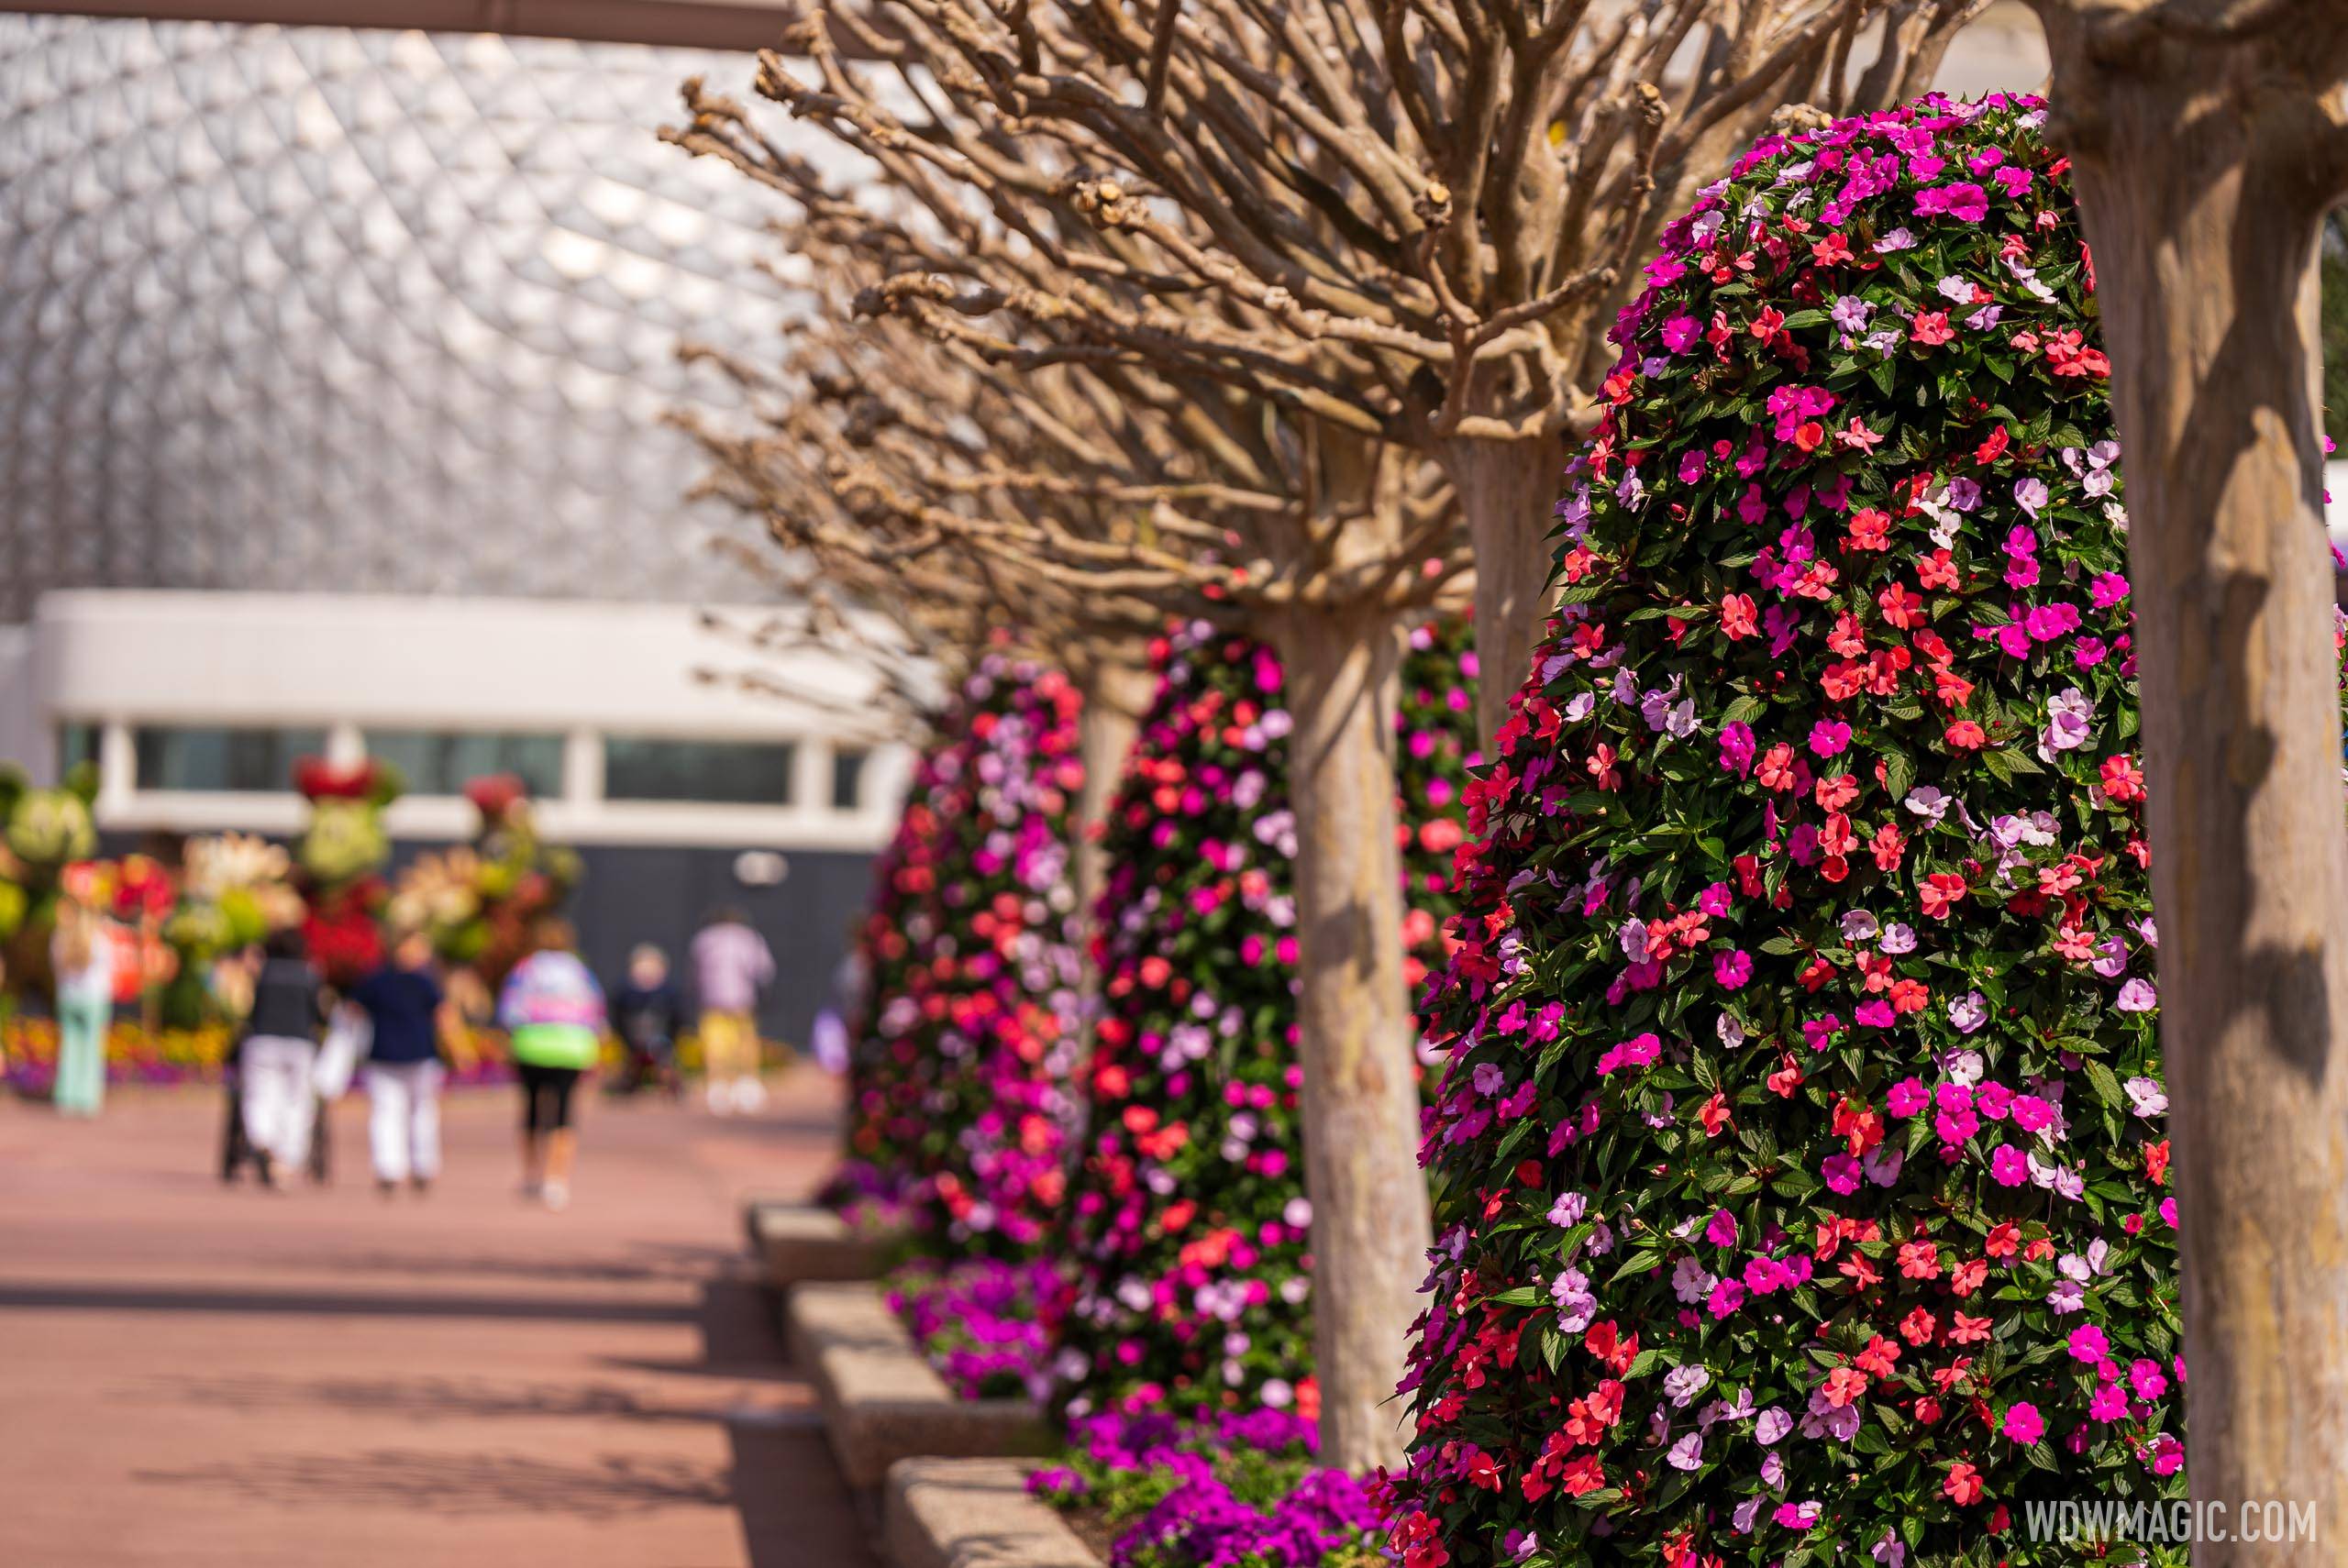 Flower towers at the EPCOT Flower and Garden Festival